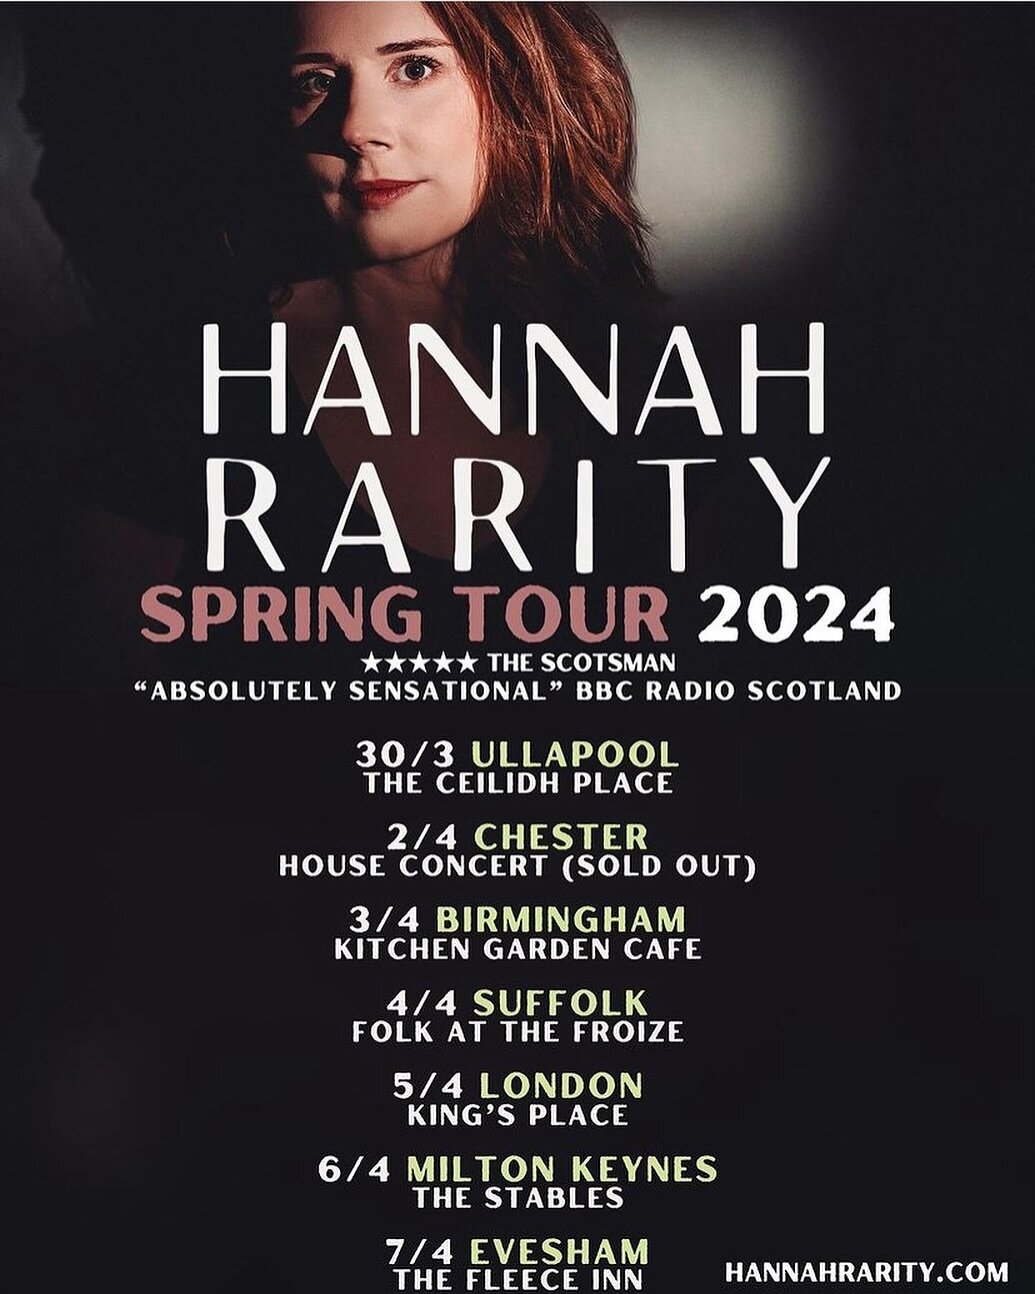 Hannah Rarity&rsquo;s first tour in England - tickets on sale now!
hannahrarity.com/gigs 🎟️